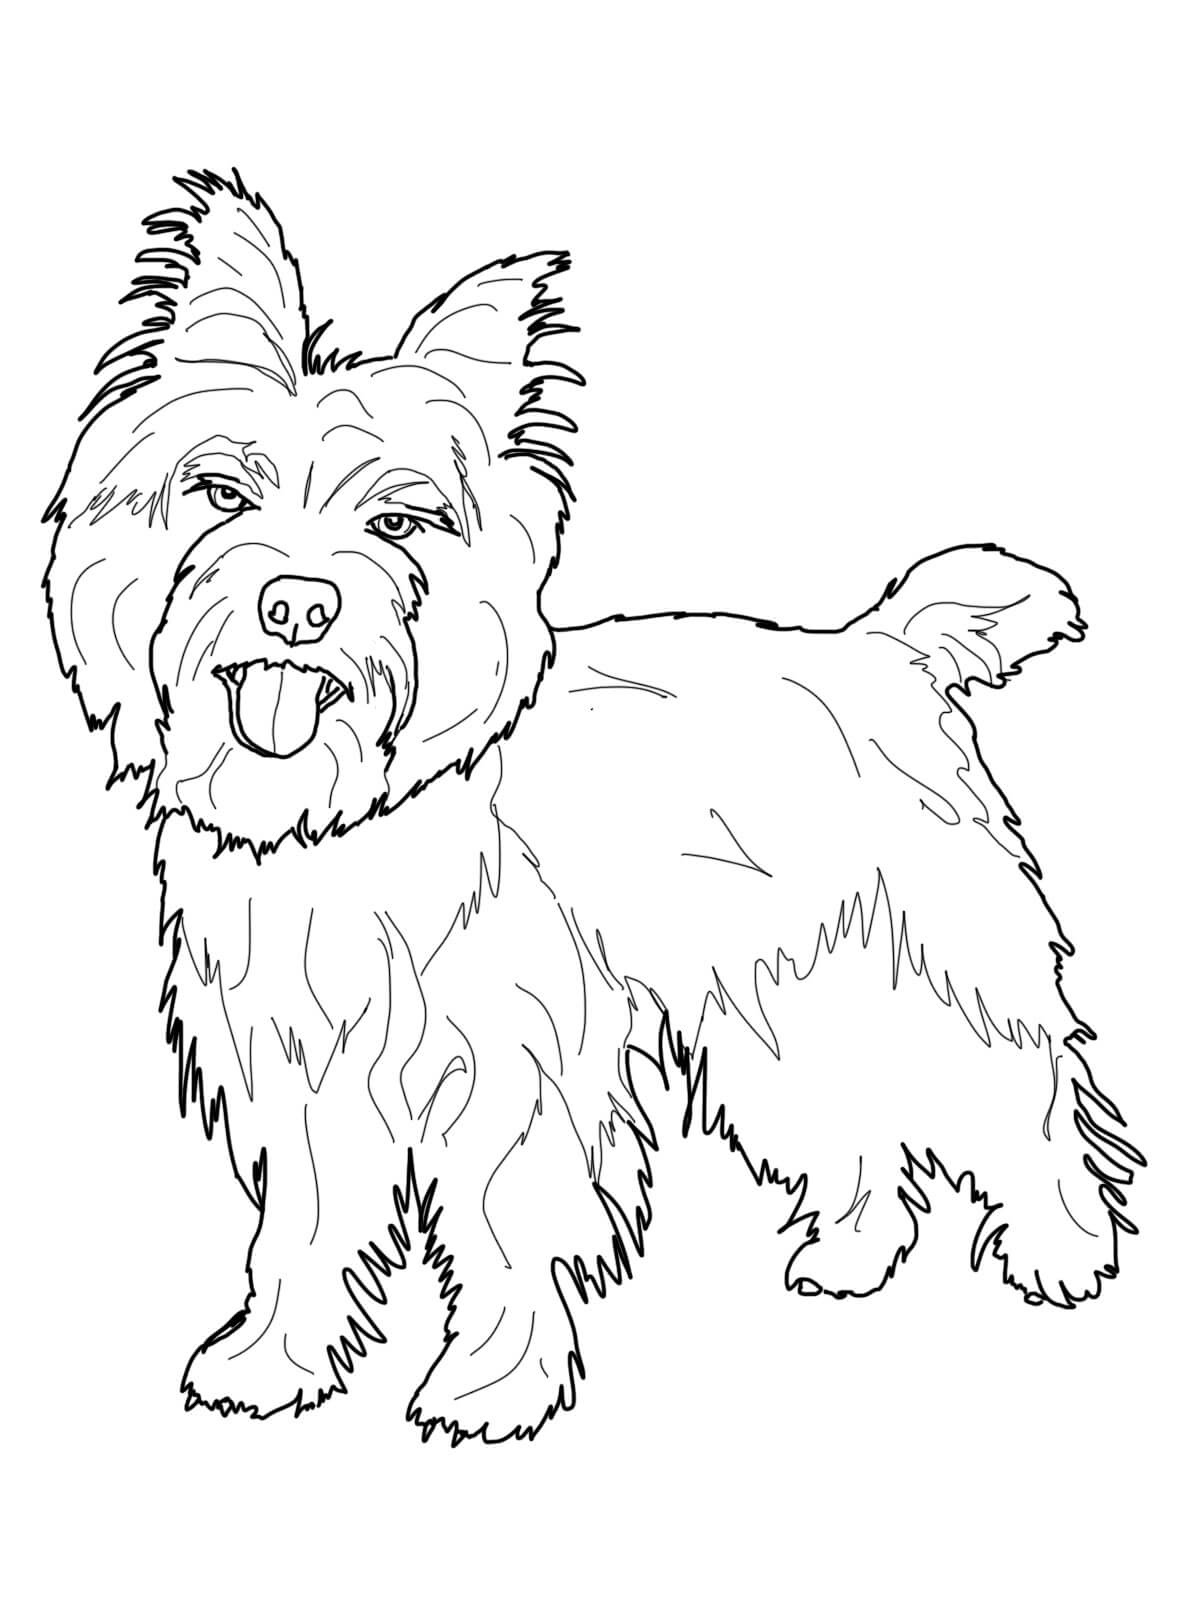 Cairn Terrier Coloring Page